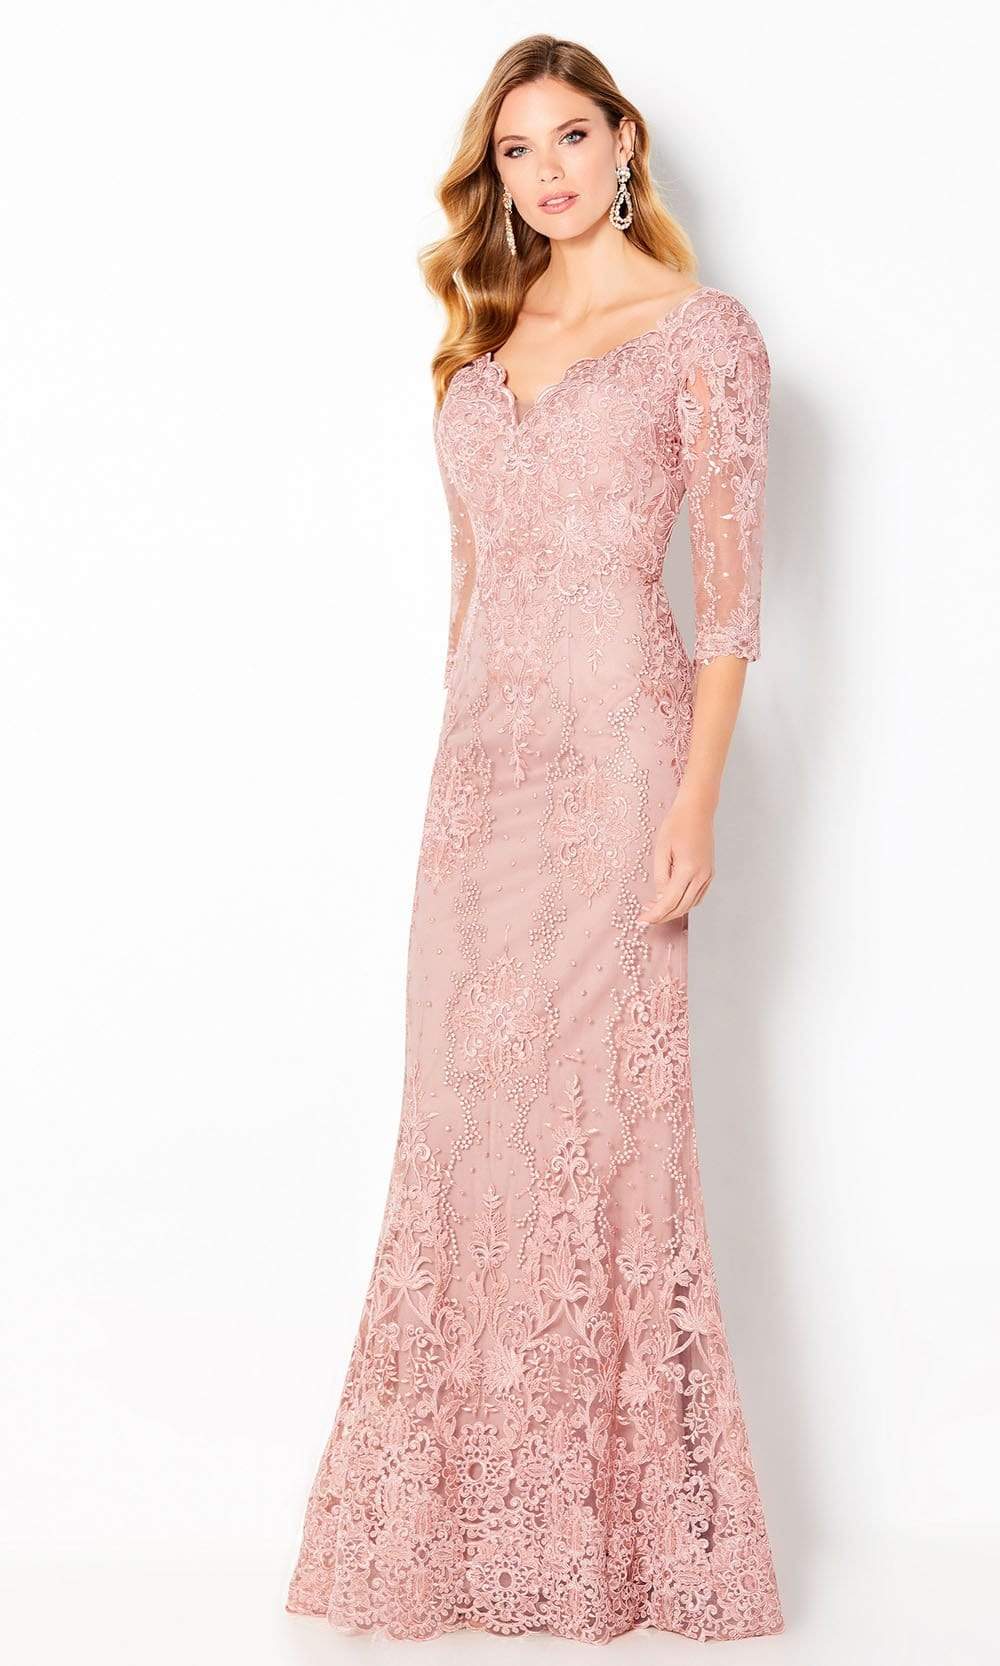 Cameron Blake by Mon Cheri - 220631 Corded Lace Mermaid Gown Evening Dresses 4 / Rose